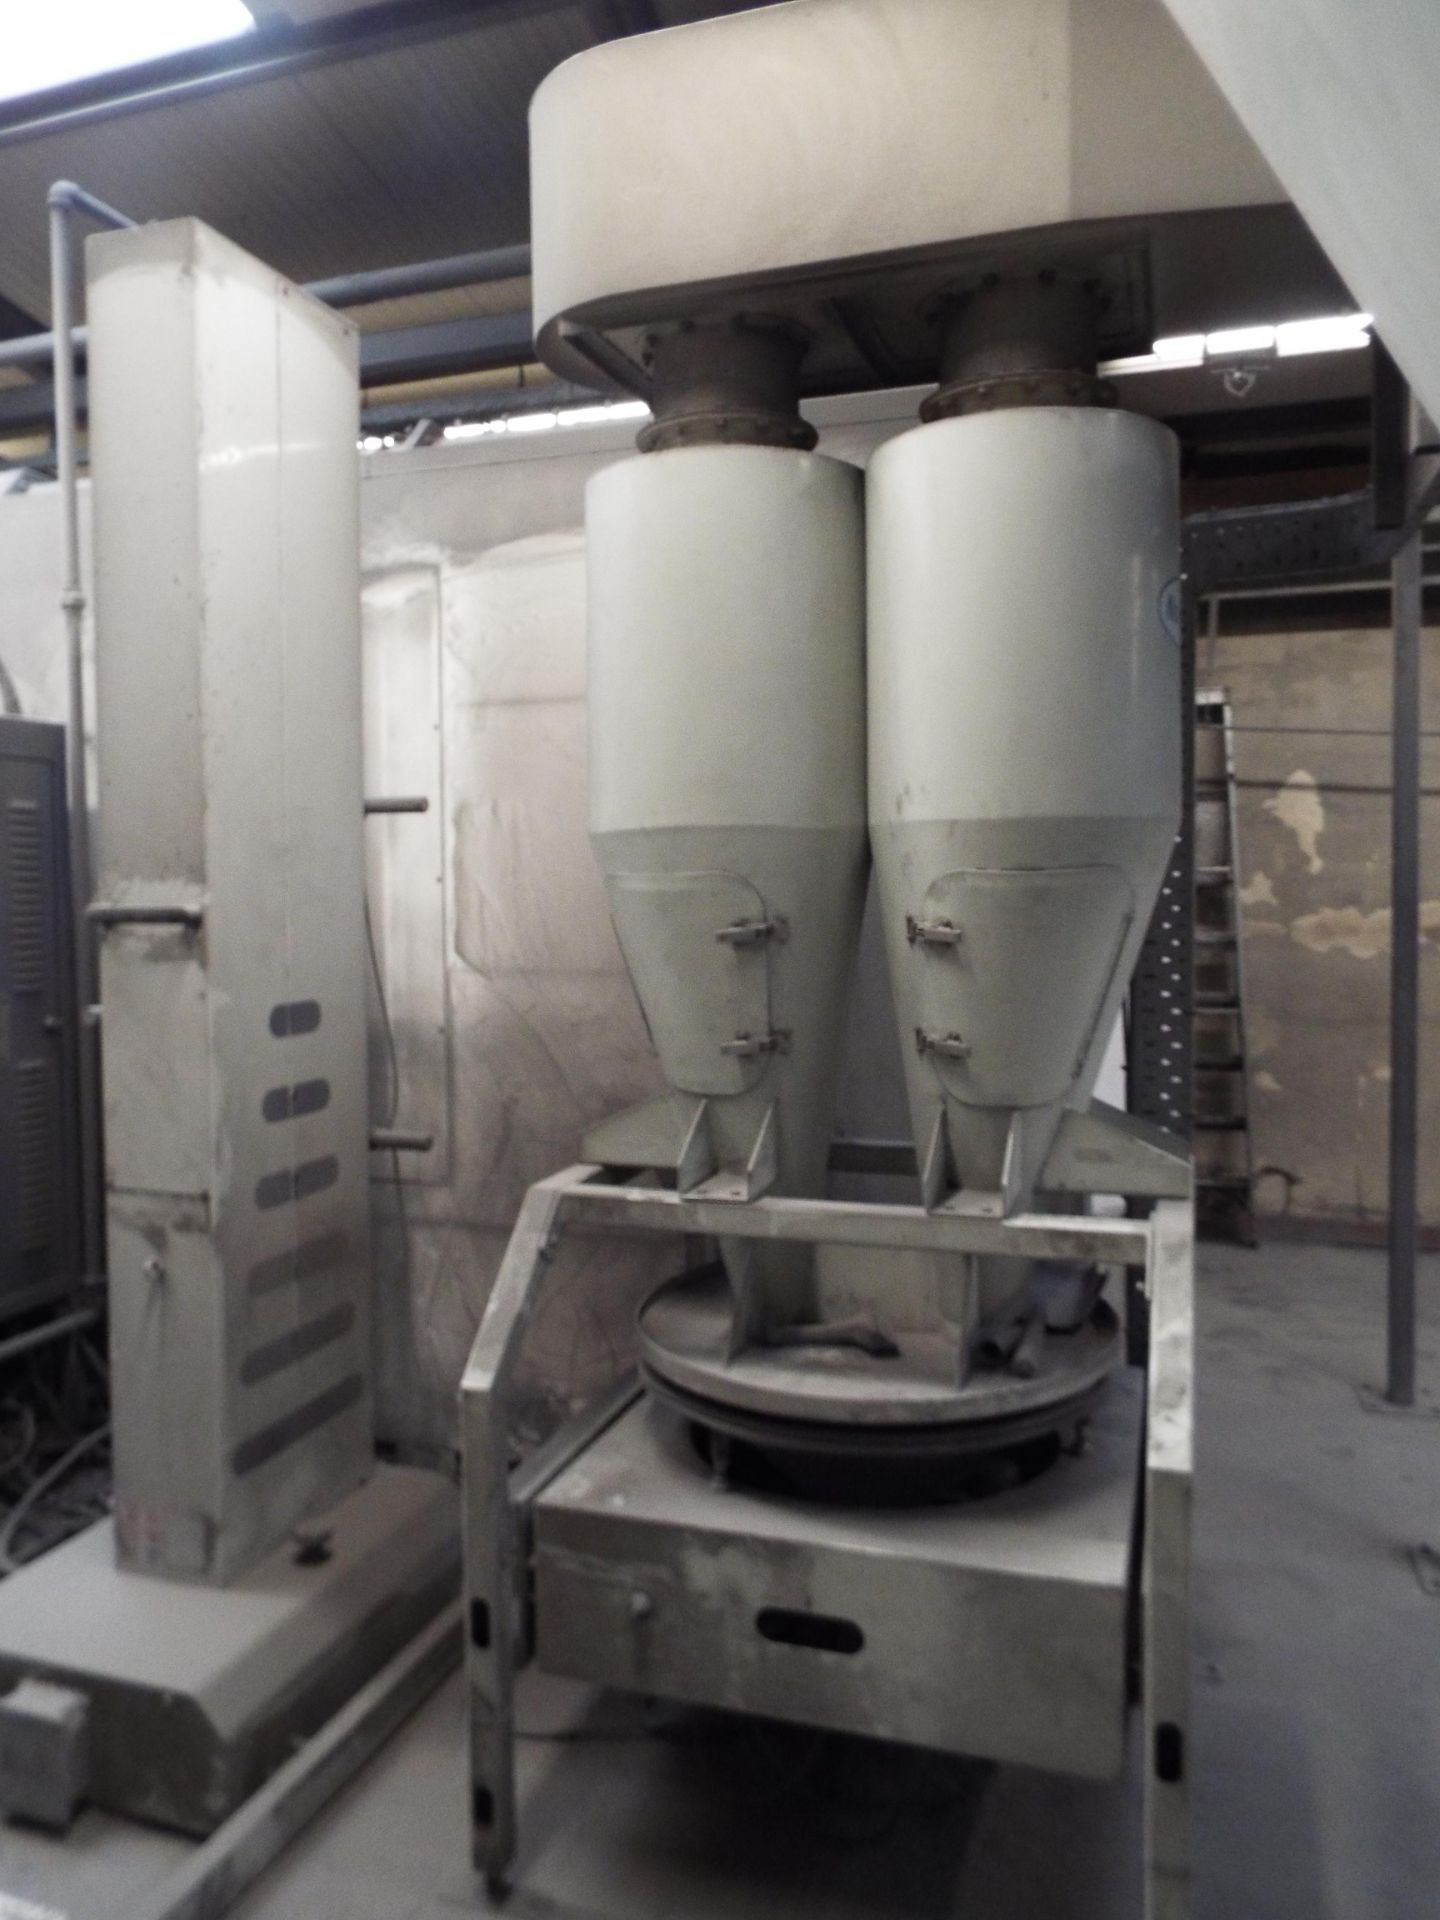 Nordson Powder Preparation,Spray Booth,Reciprocating Guns,Cyclone,Dust Extractor & Fire Detection. - Image 11 of 20